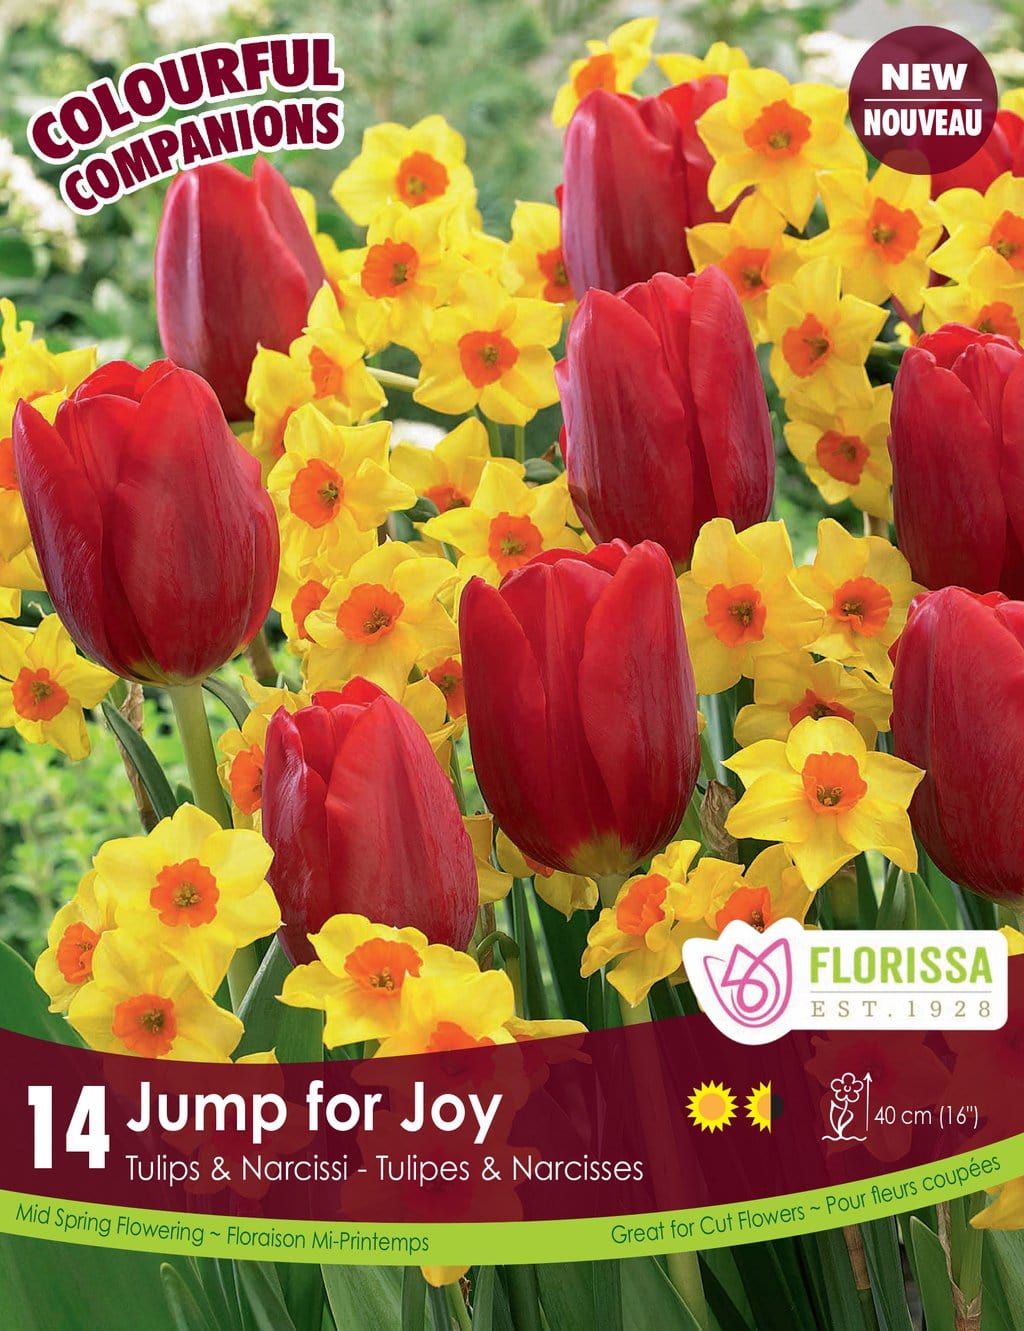 Tulips & Narcissi, Jump for Joy, Colorful Companions  - 14 pack